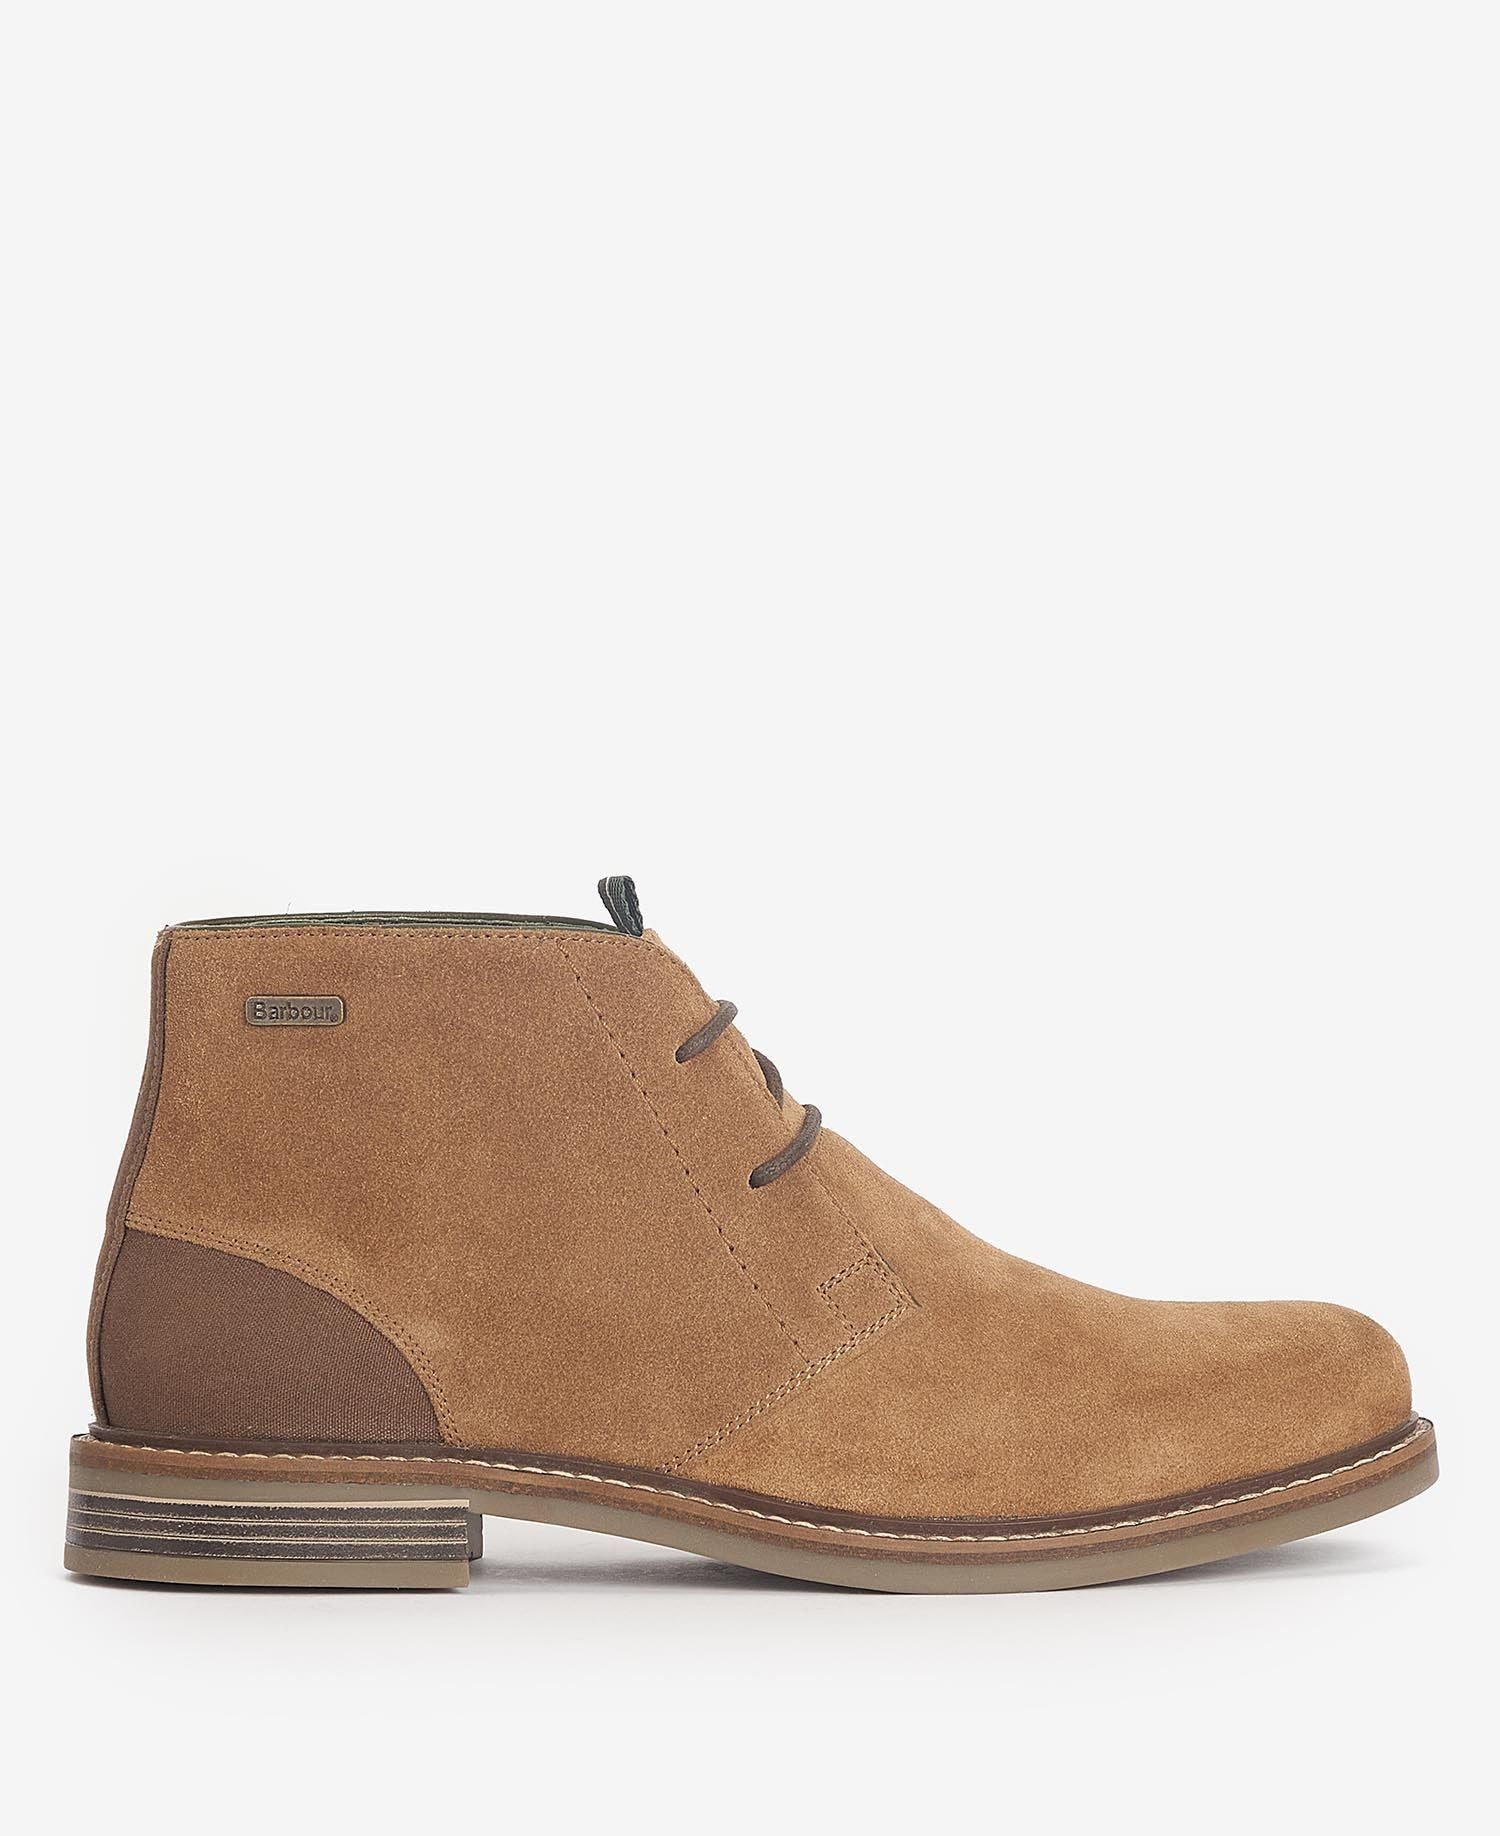 Men's Readhead Boots - Fawn Suede